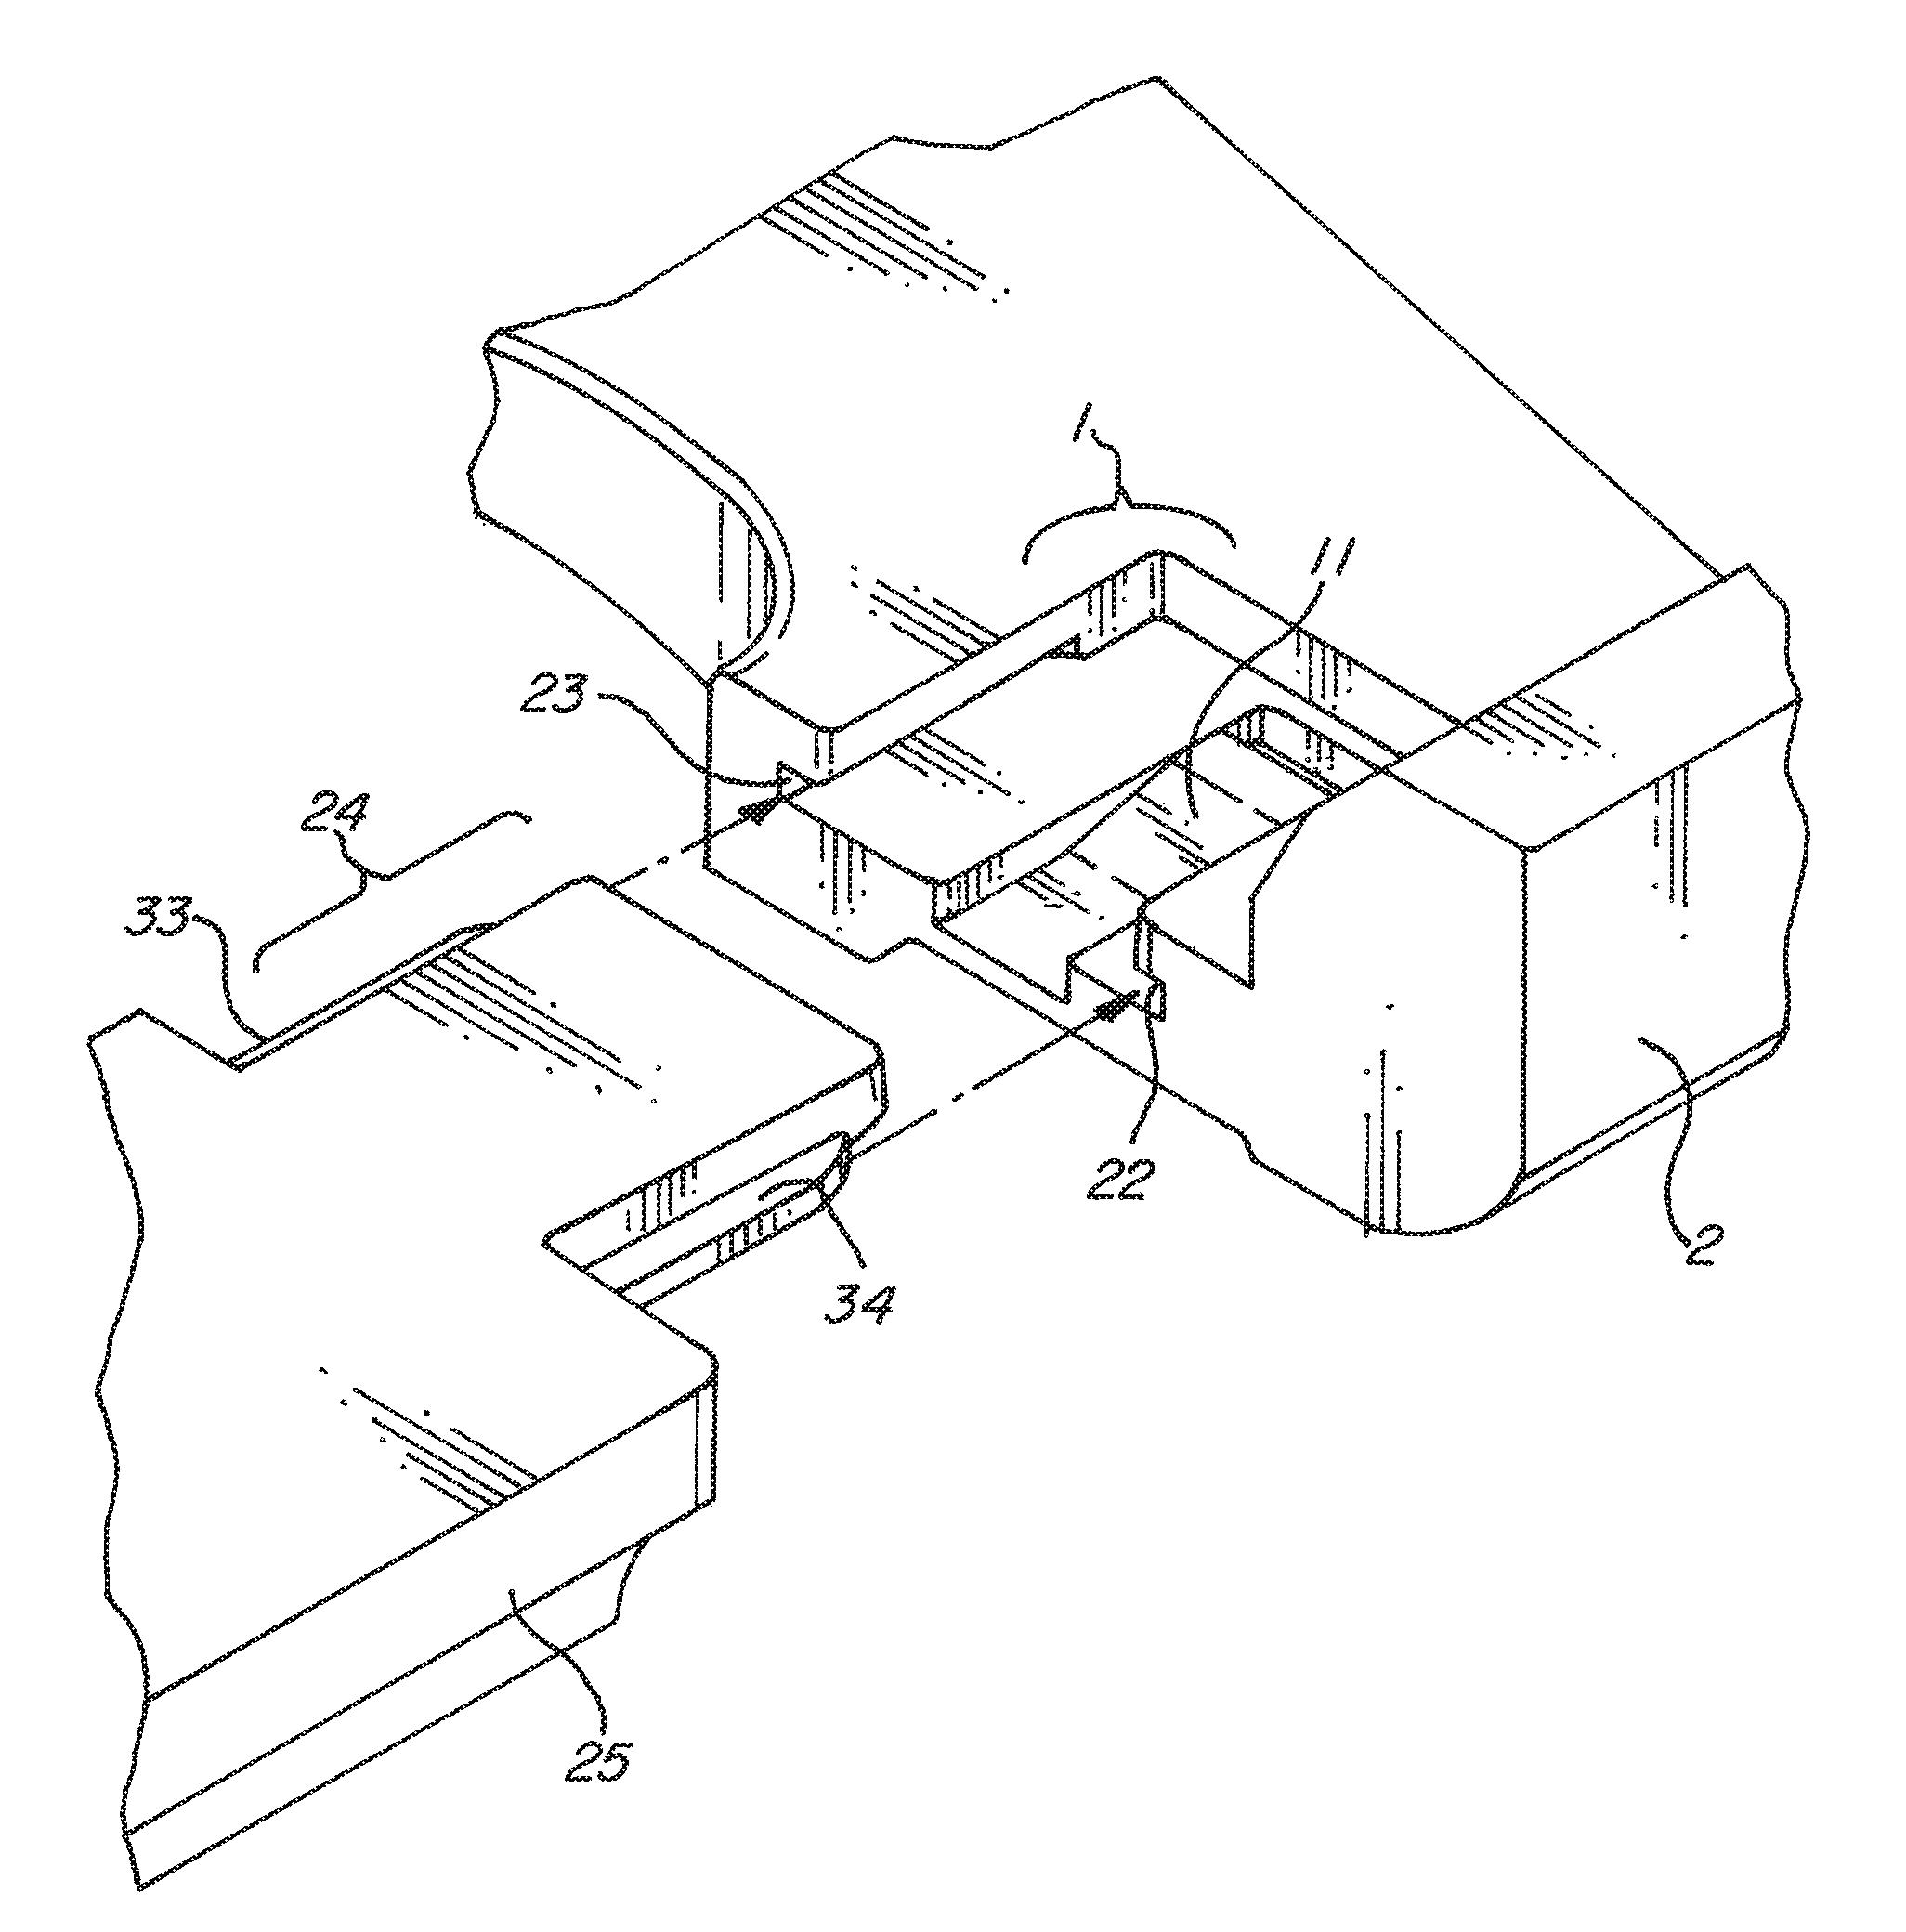 System and method for assembling blow molded parts without use of fasteners